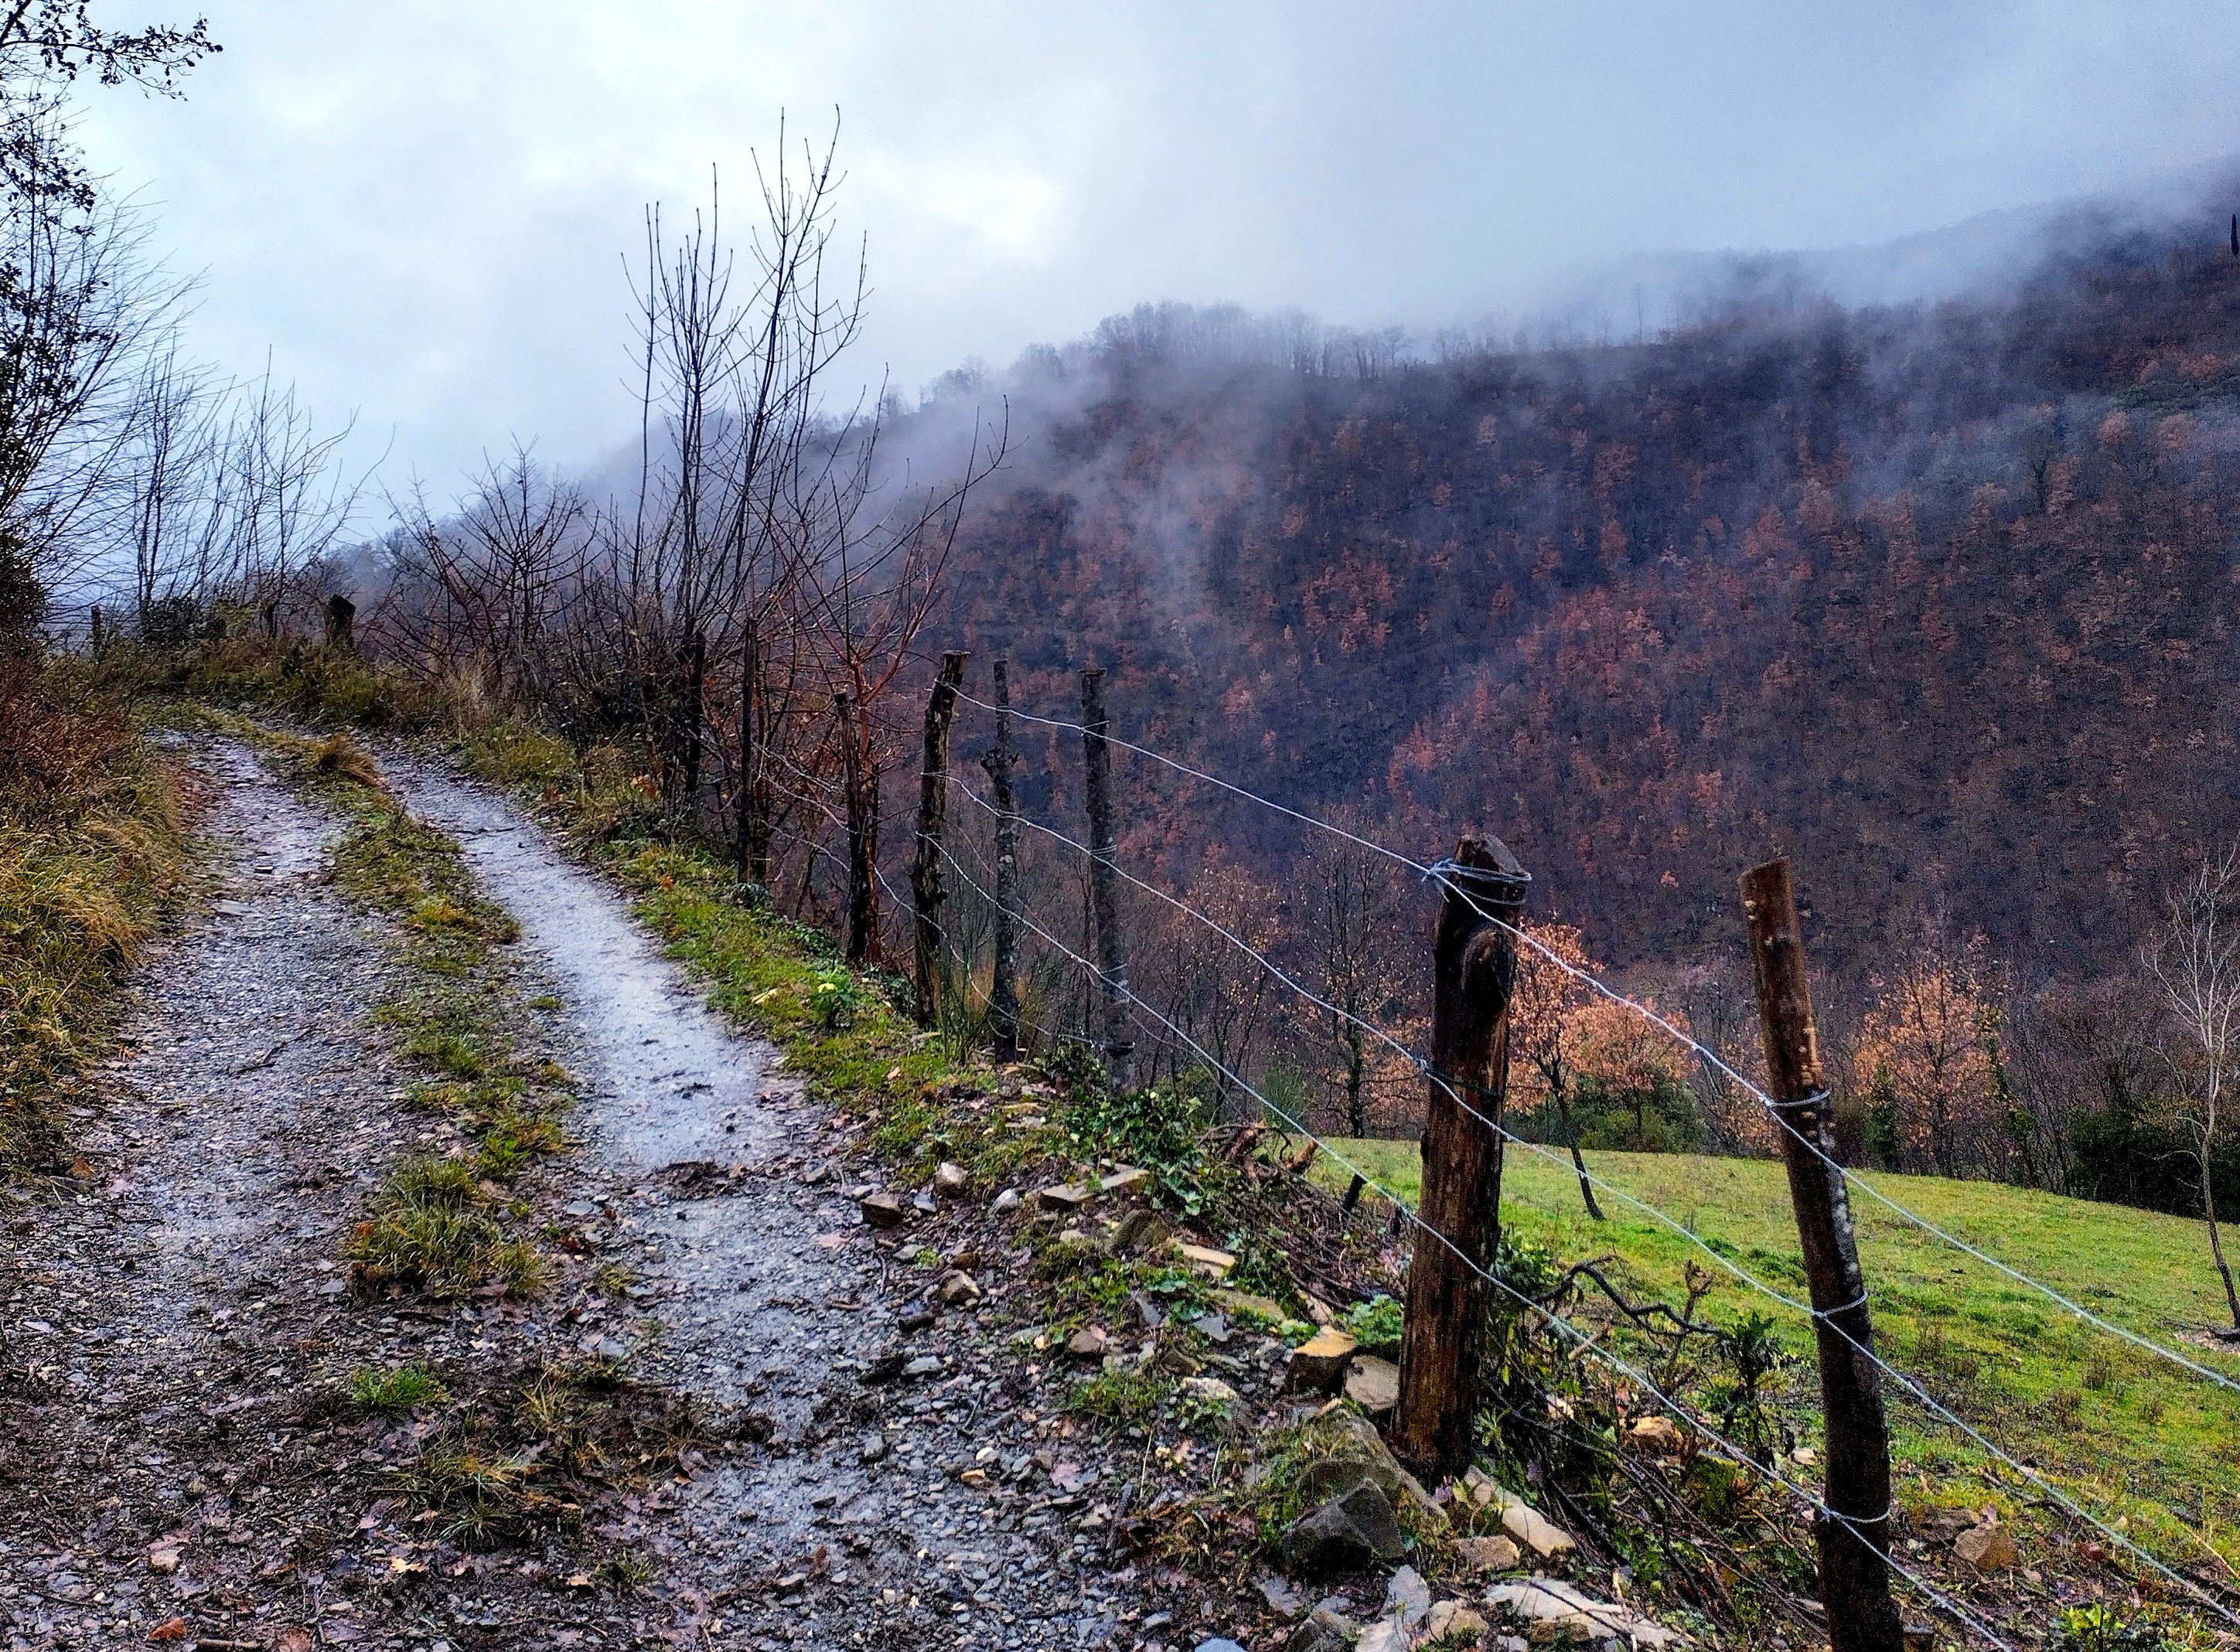 A photograph of a wet dirt road in the Apennine Mountains of Tuscany. The road bends off to the left of the image, whilst on the right there is a rustic wire fence, a green field, and the opposite side of the valley covered in trees, with a few traces of autumn colour remaining, and low cloud clinging on.